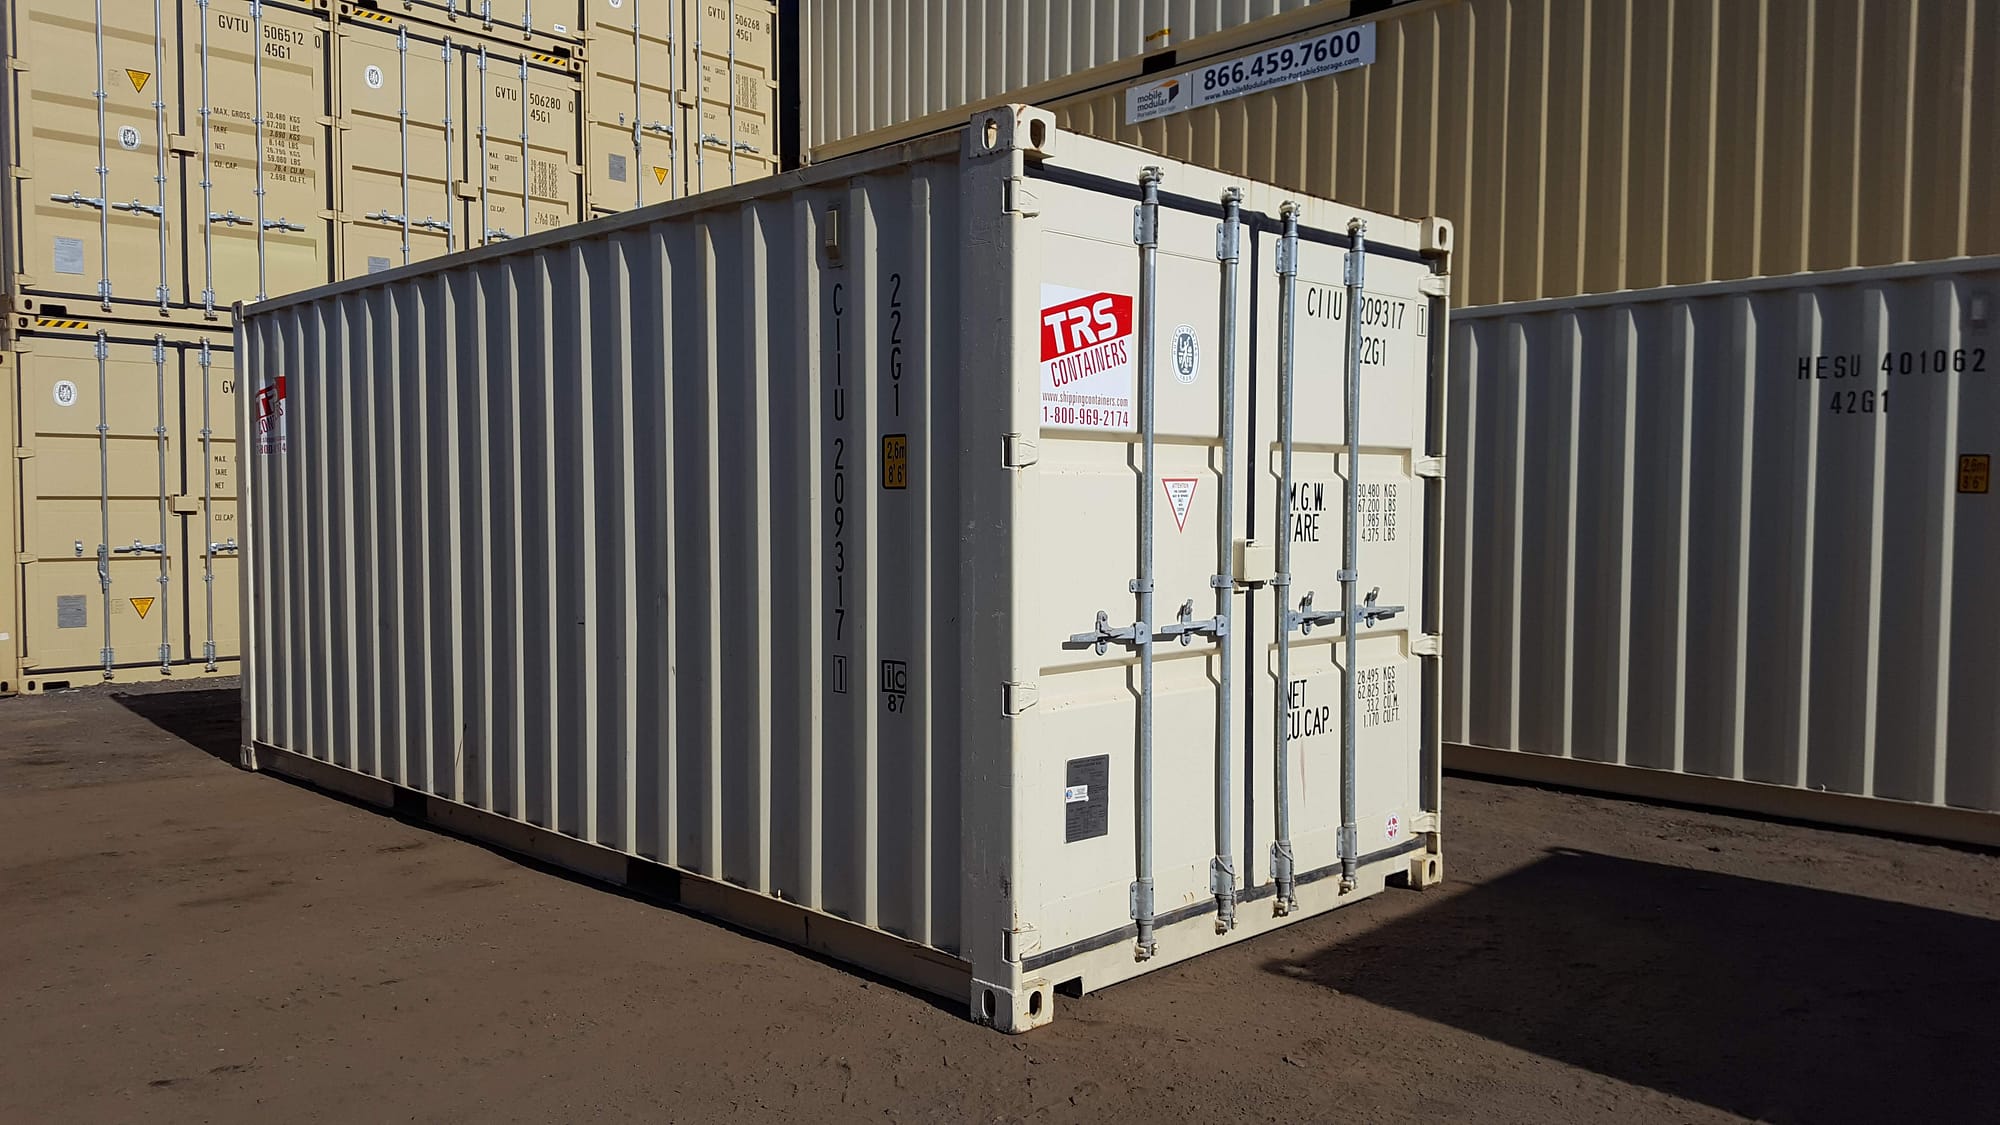 TRS new containers come in many colors